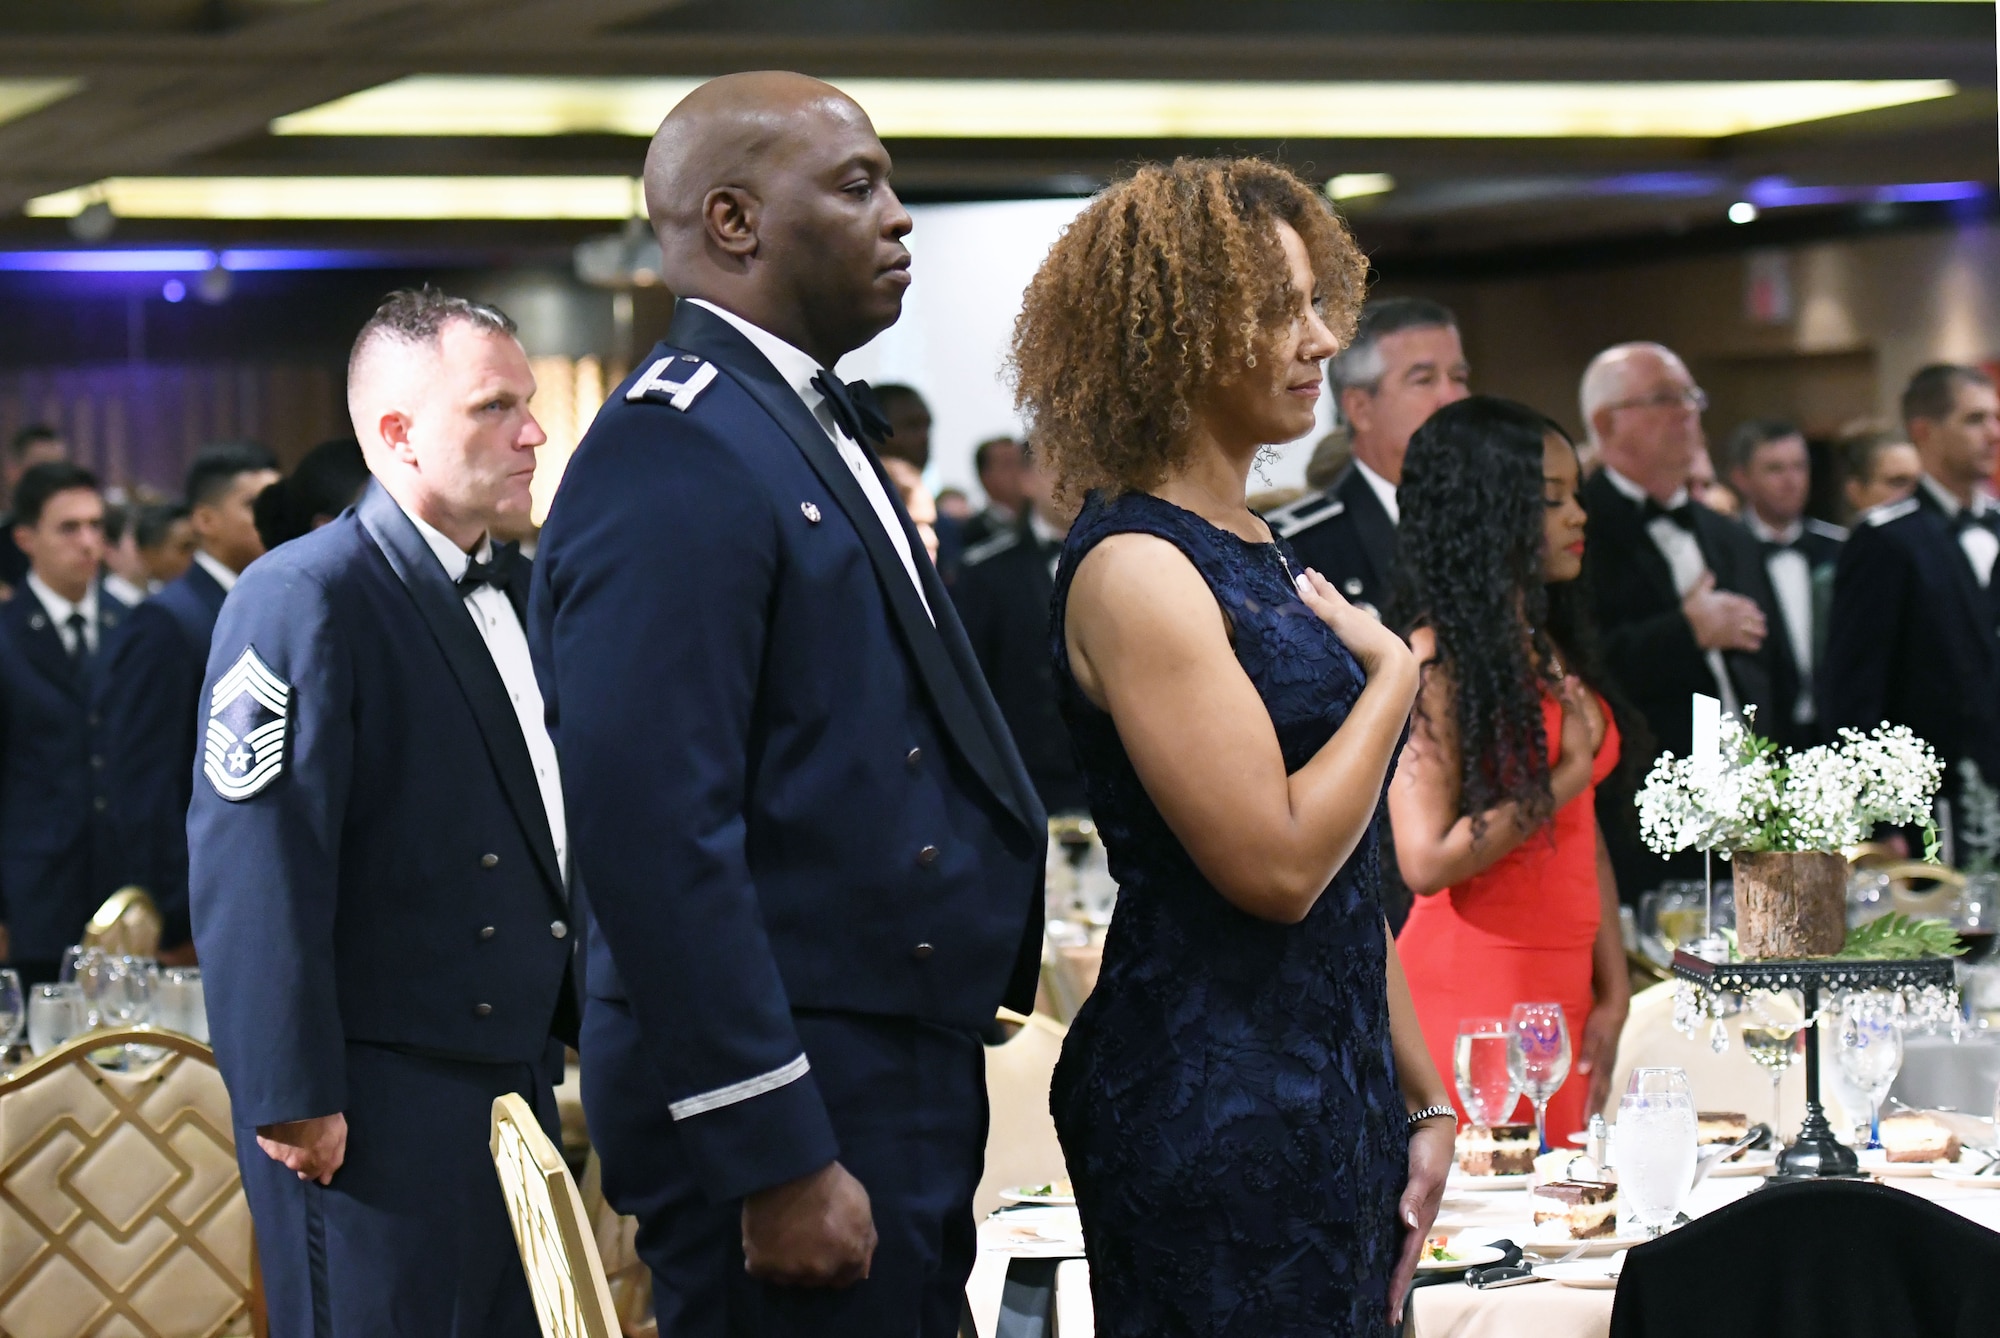 U.S. Air Force Col. Leo Lawson, Jr., 81st Training Group commander, and his wife, Denise, attend the U.S Air Force 71st Birthday Ball at the Imperial Palace Casino, Biloxi, Mississippi, Sept. 22, 2018. The event, hosted by the 81st Training Wing and the John C. Stennis Chapter Air Force Association, also included a cake cutting ceremony. (U.S. Air Force photo by Kemberly Groue)